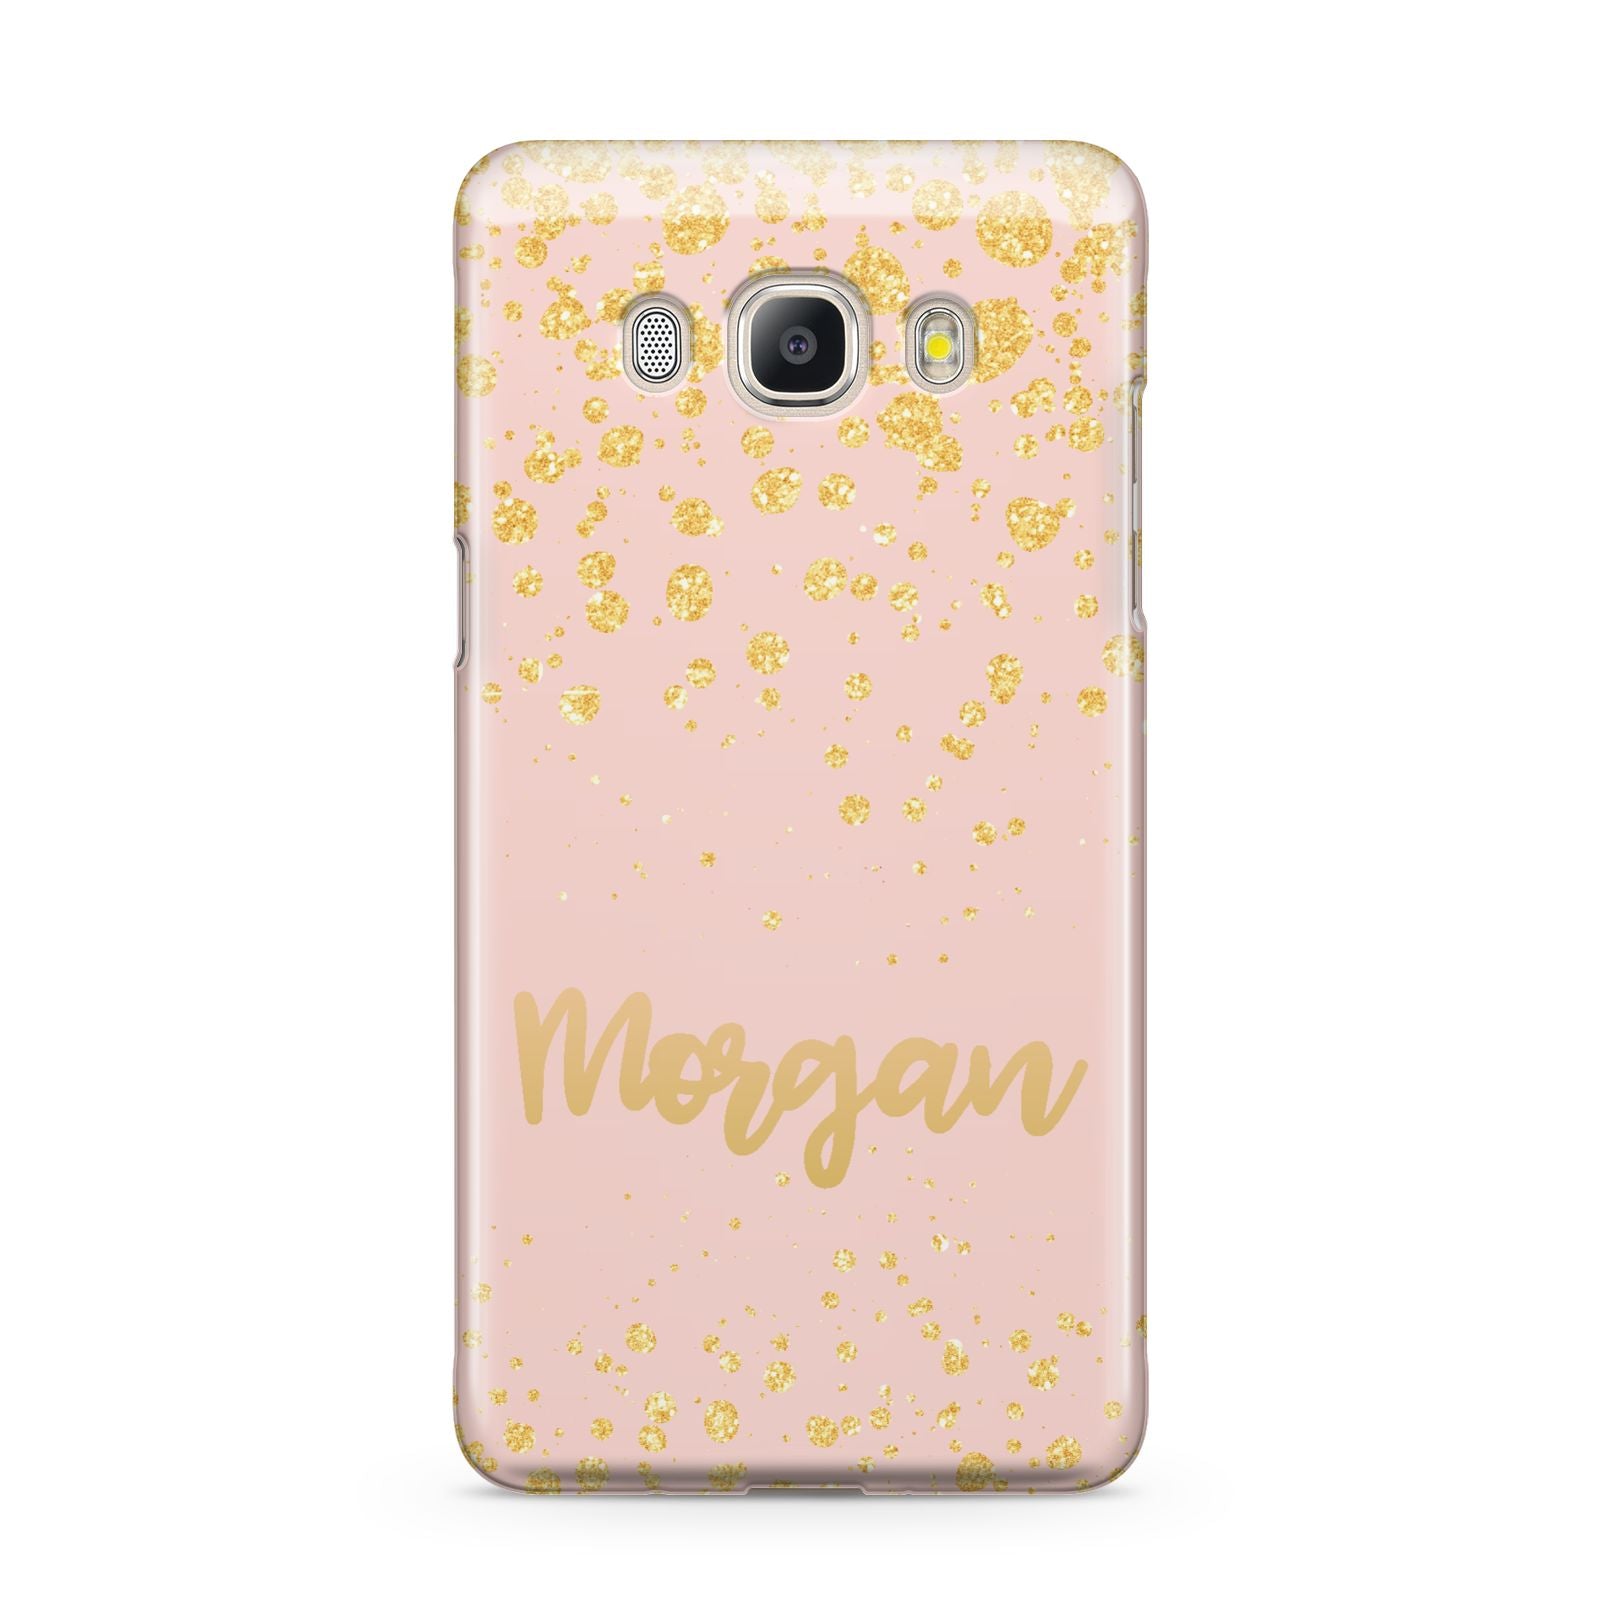 Personalised Pink Gold Splatter With Name Samsung Galaxy J5 2016 Case